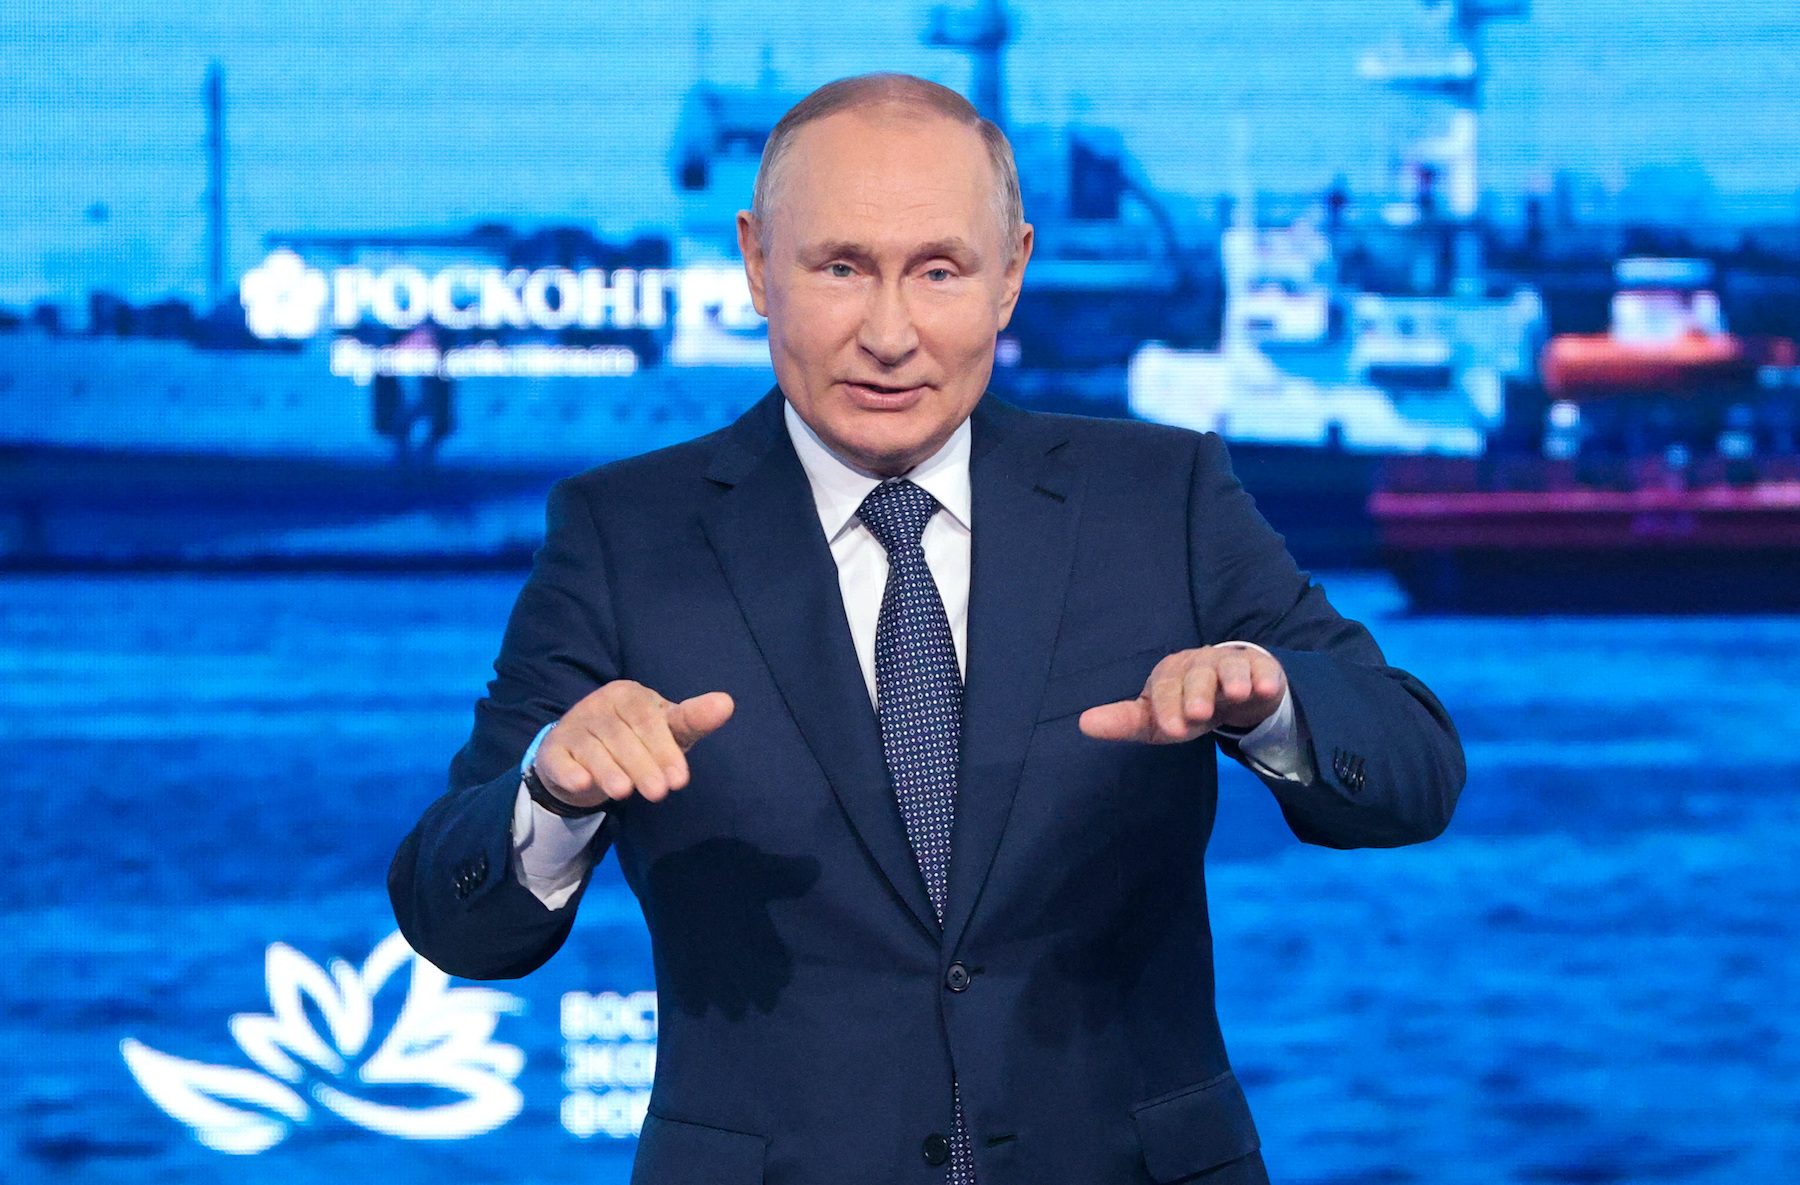 Russia is gaining from conflict in Ukraine, Putin says